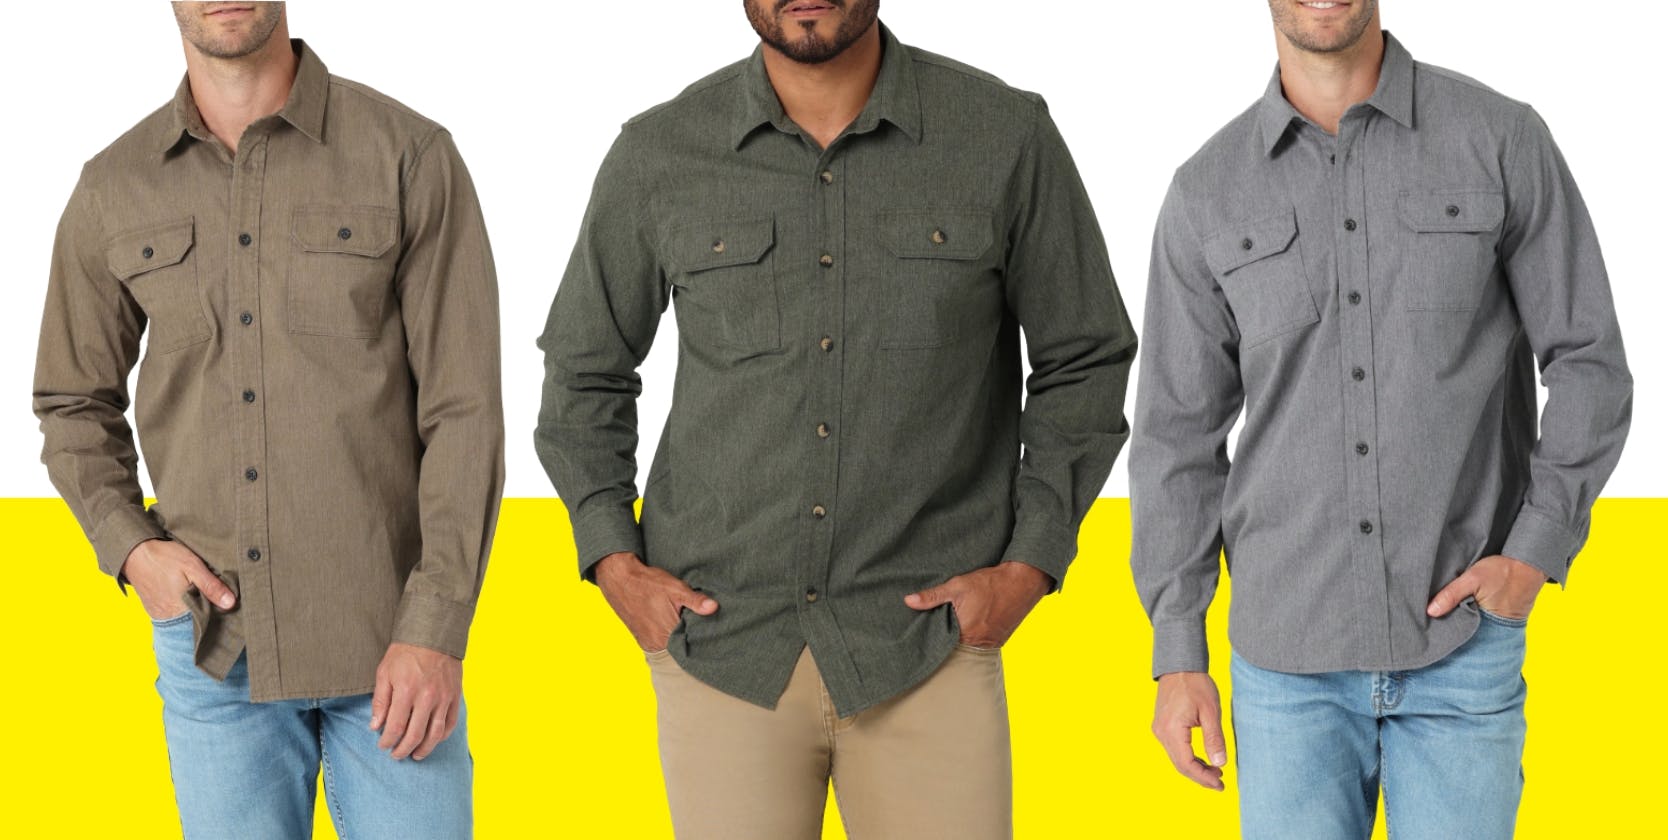 Men's Soft Wrangler Shirts, Only $11 at Walmart - The Krazy Coupon Lady